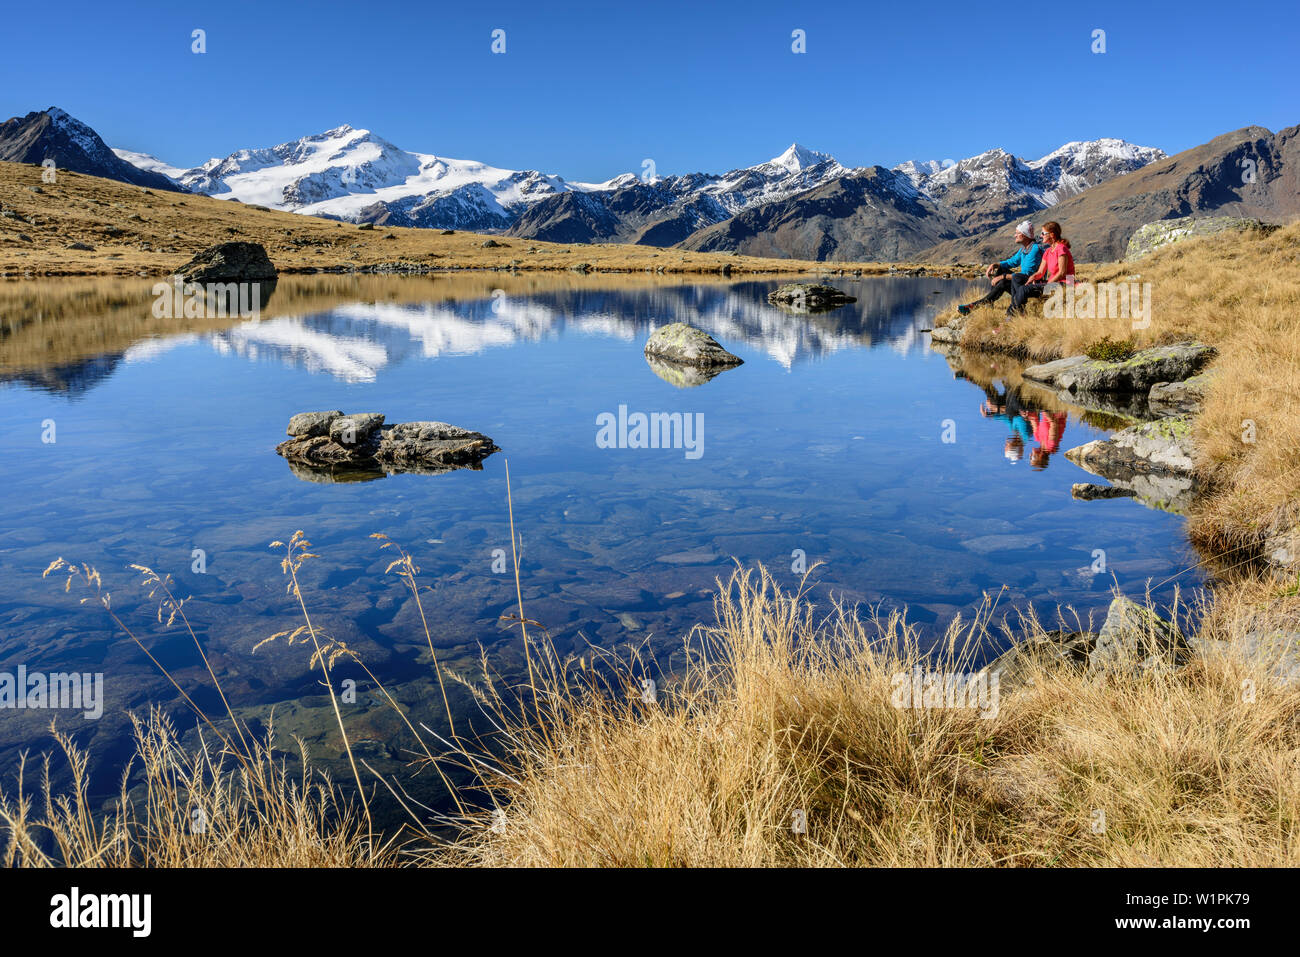 Man and woman sitting at mountain lake with Cevedale in background, valley of Martelltal, Ortler group, South Tyrol, Italy Stock Photo